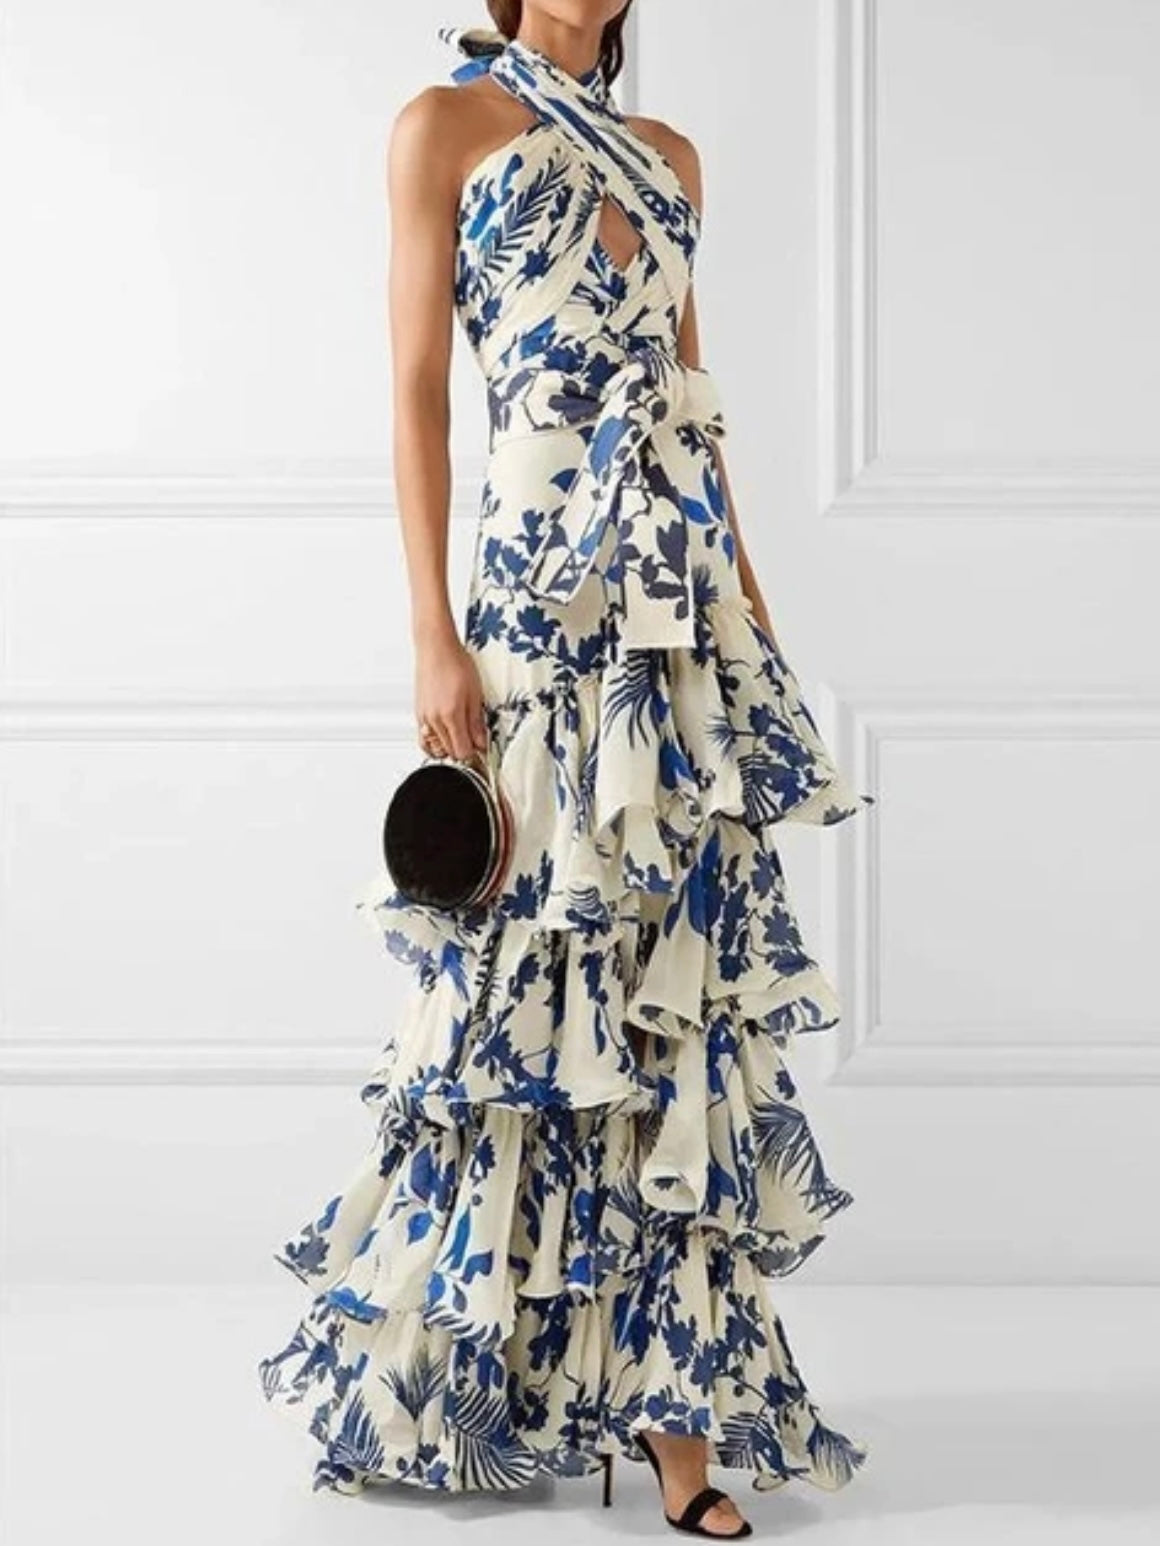 White and blue floral printed layered maxi dress